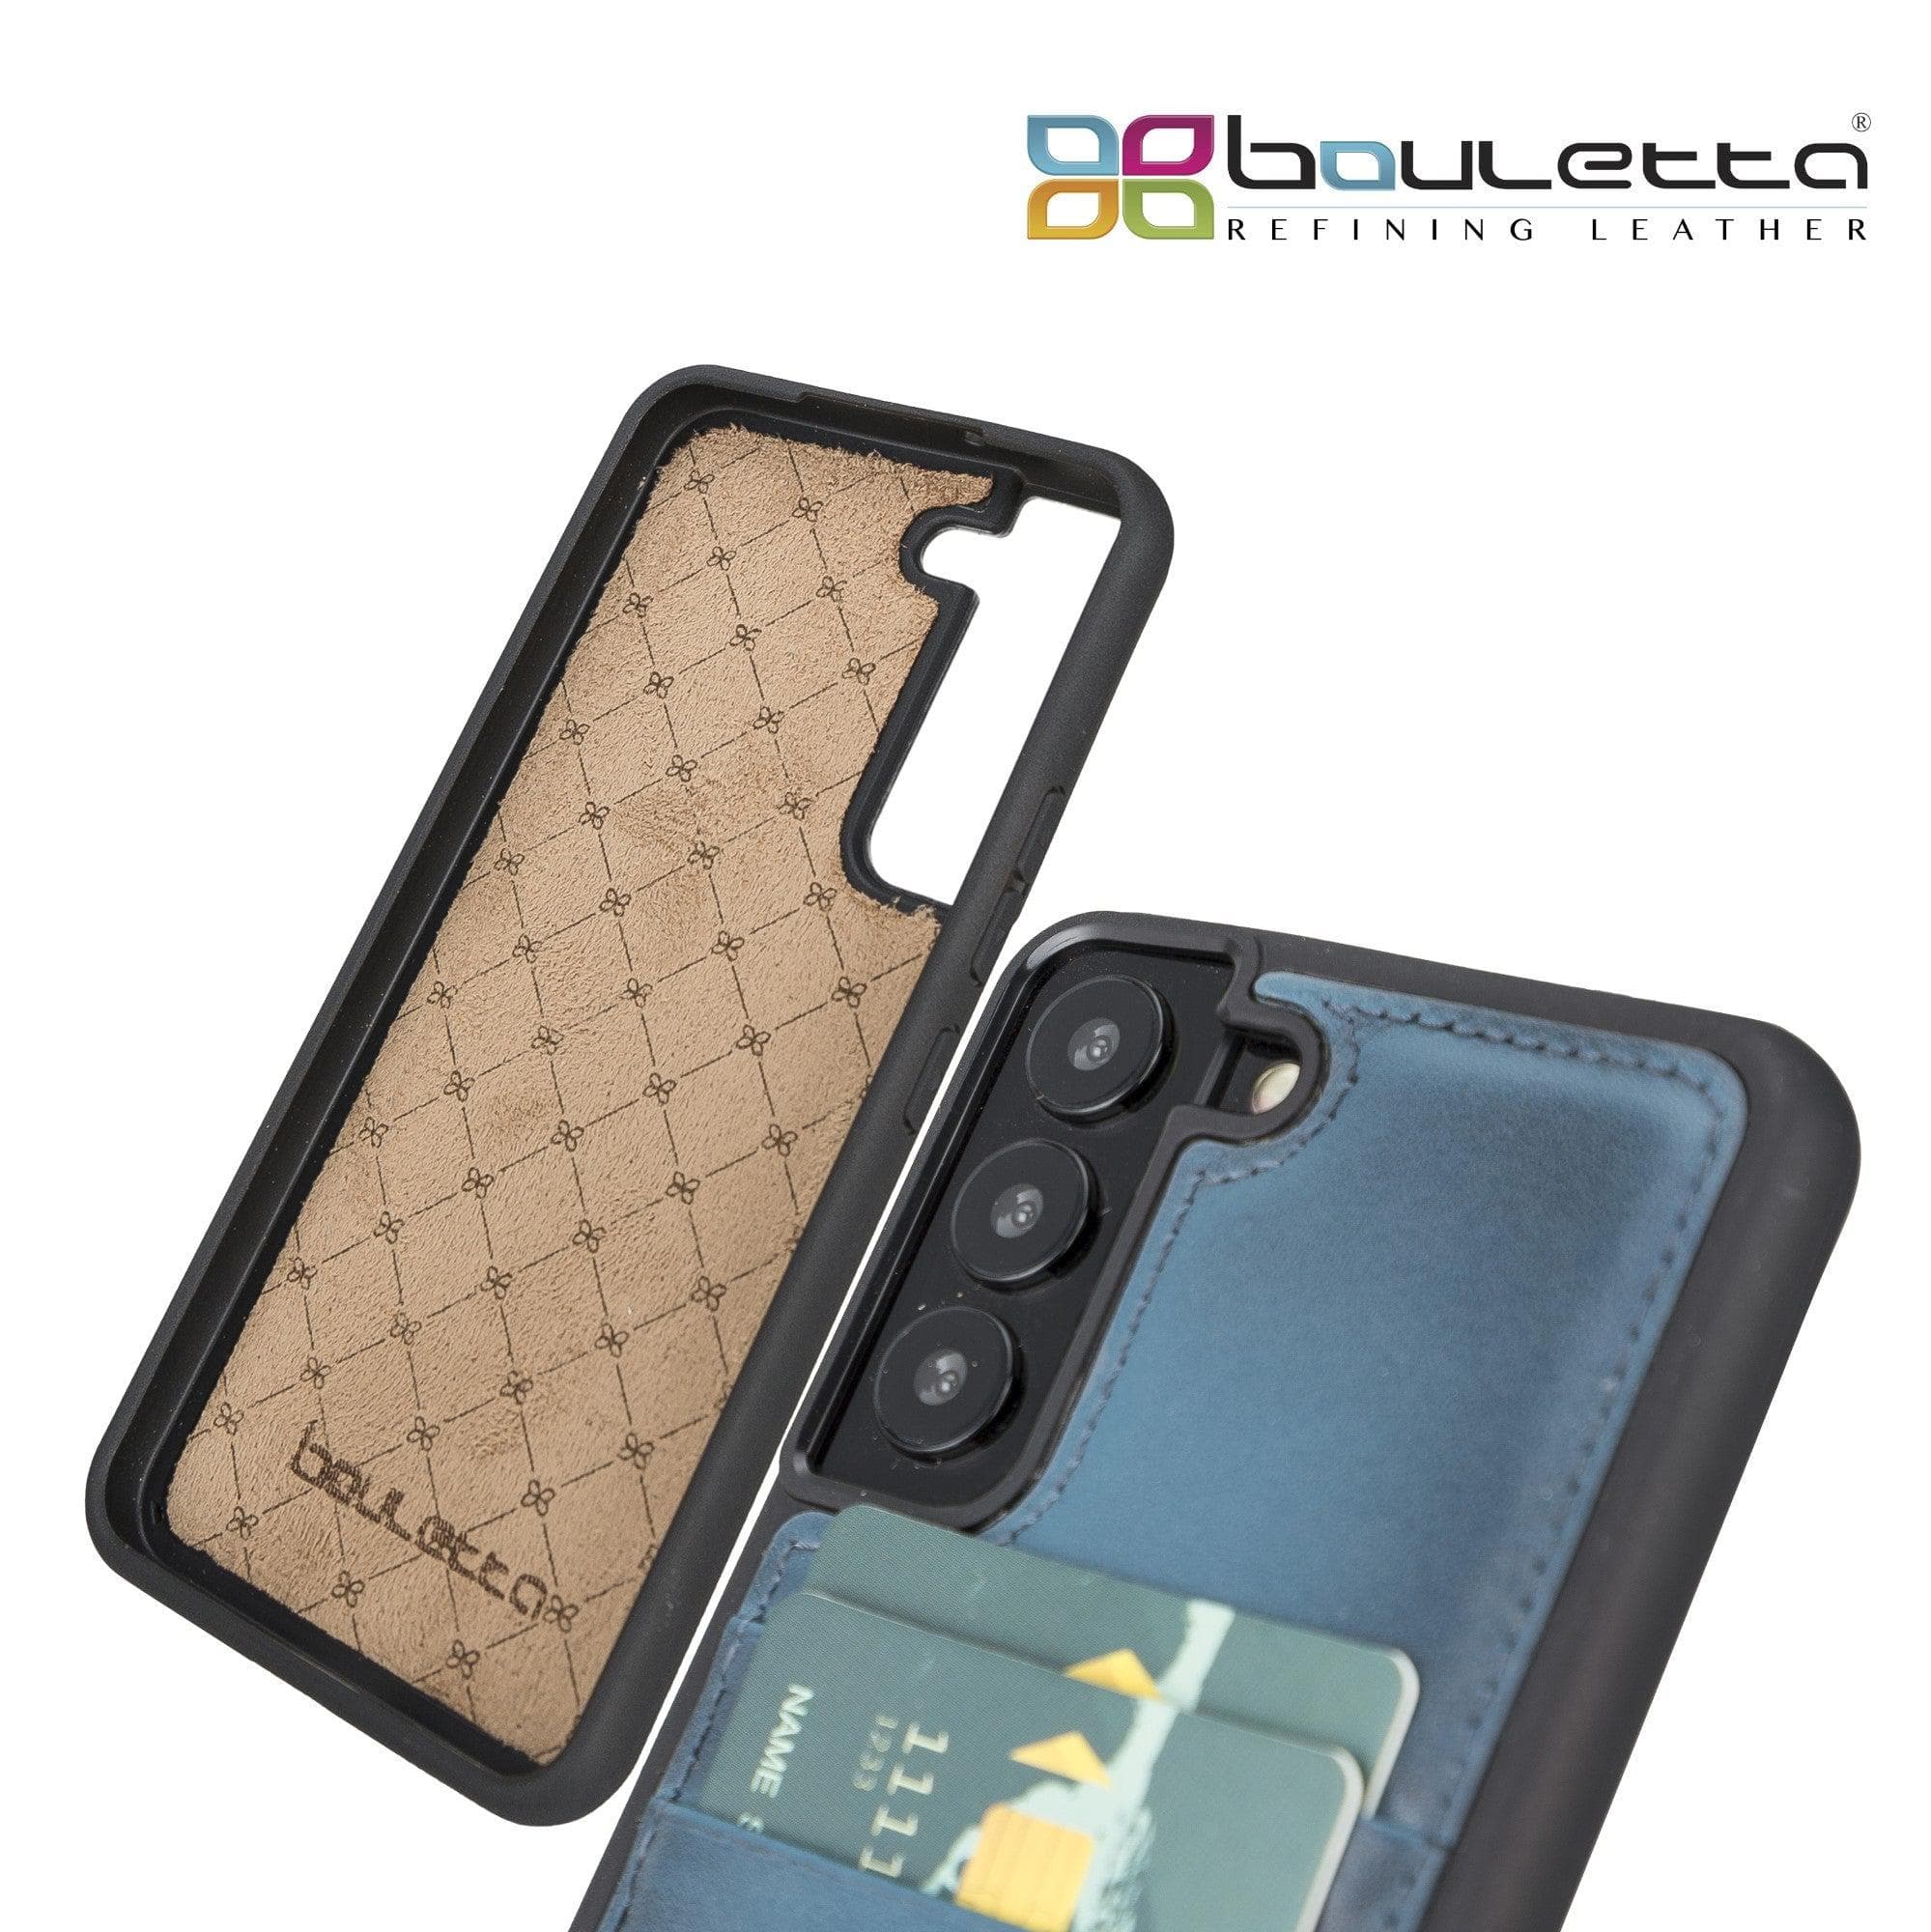 Samsung Galaxy S22 Series Genuine Leather Slim Back Cover Case with Card Holders Bouletta